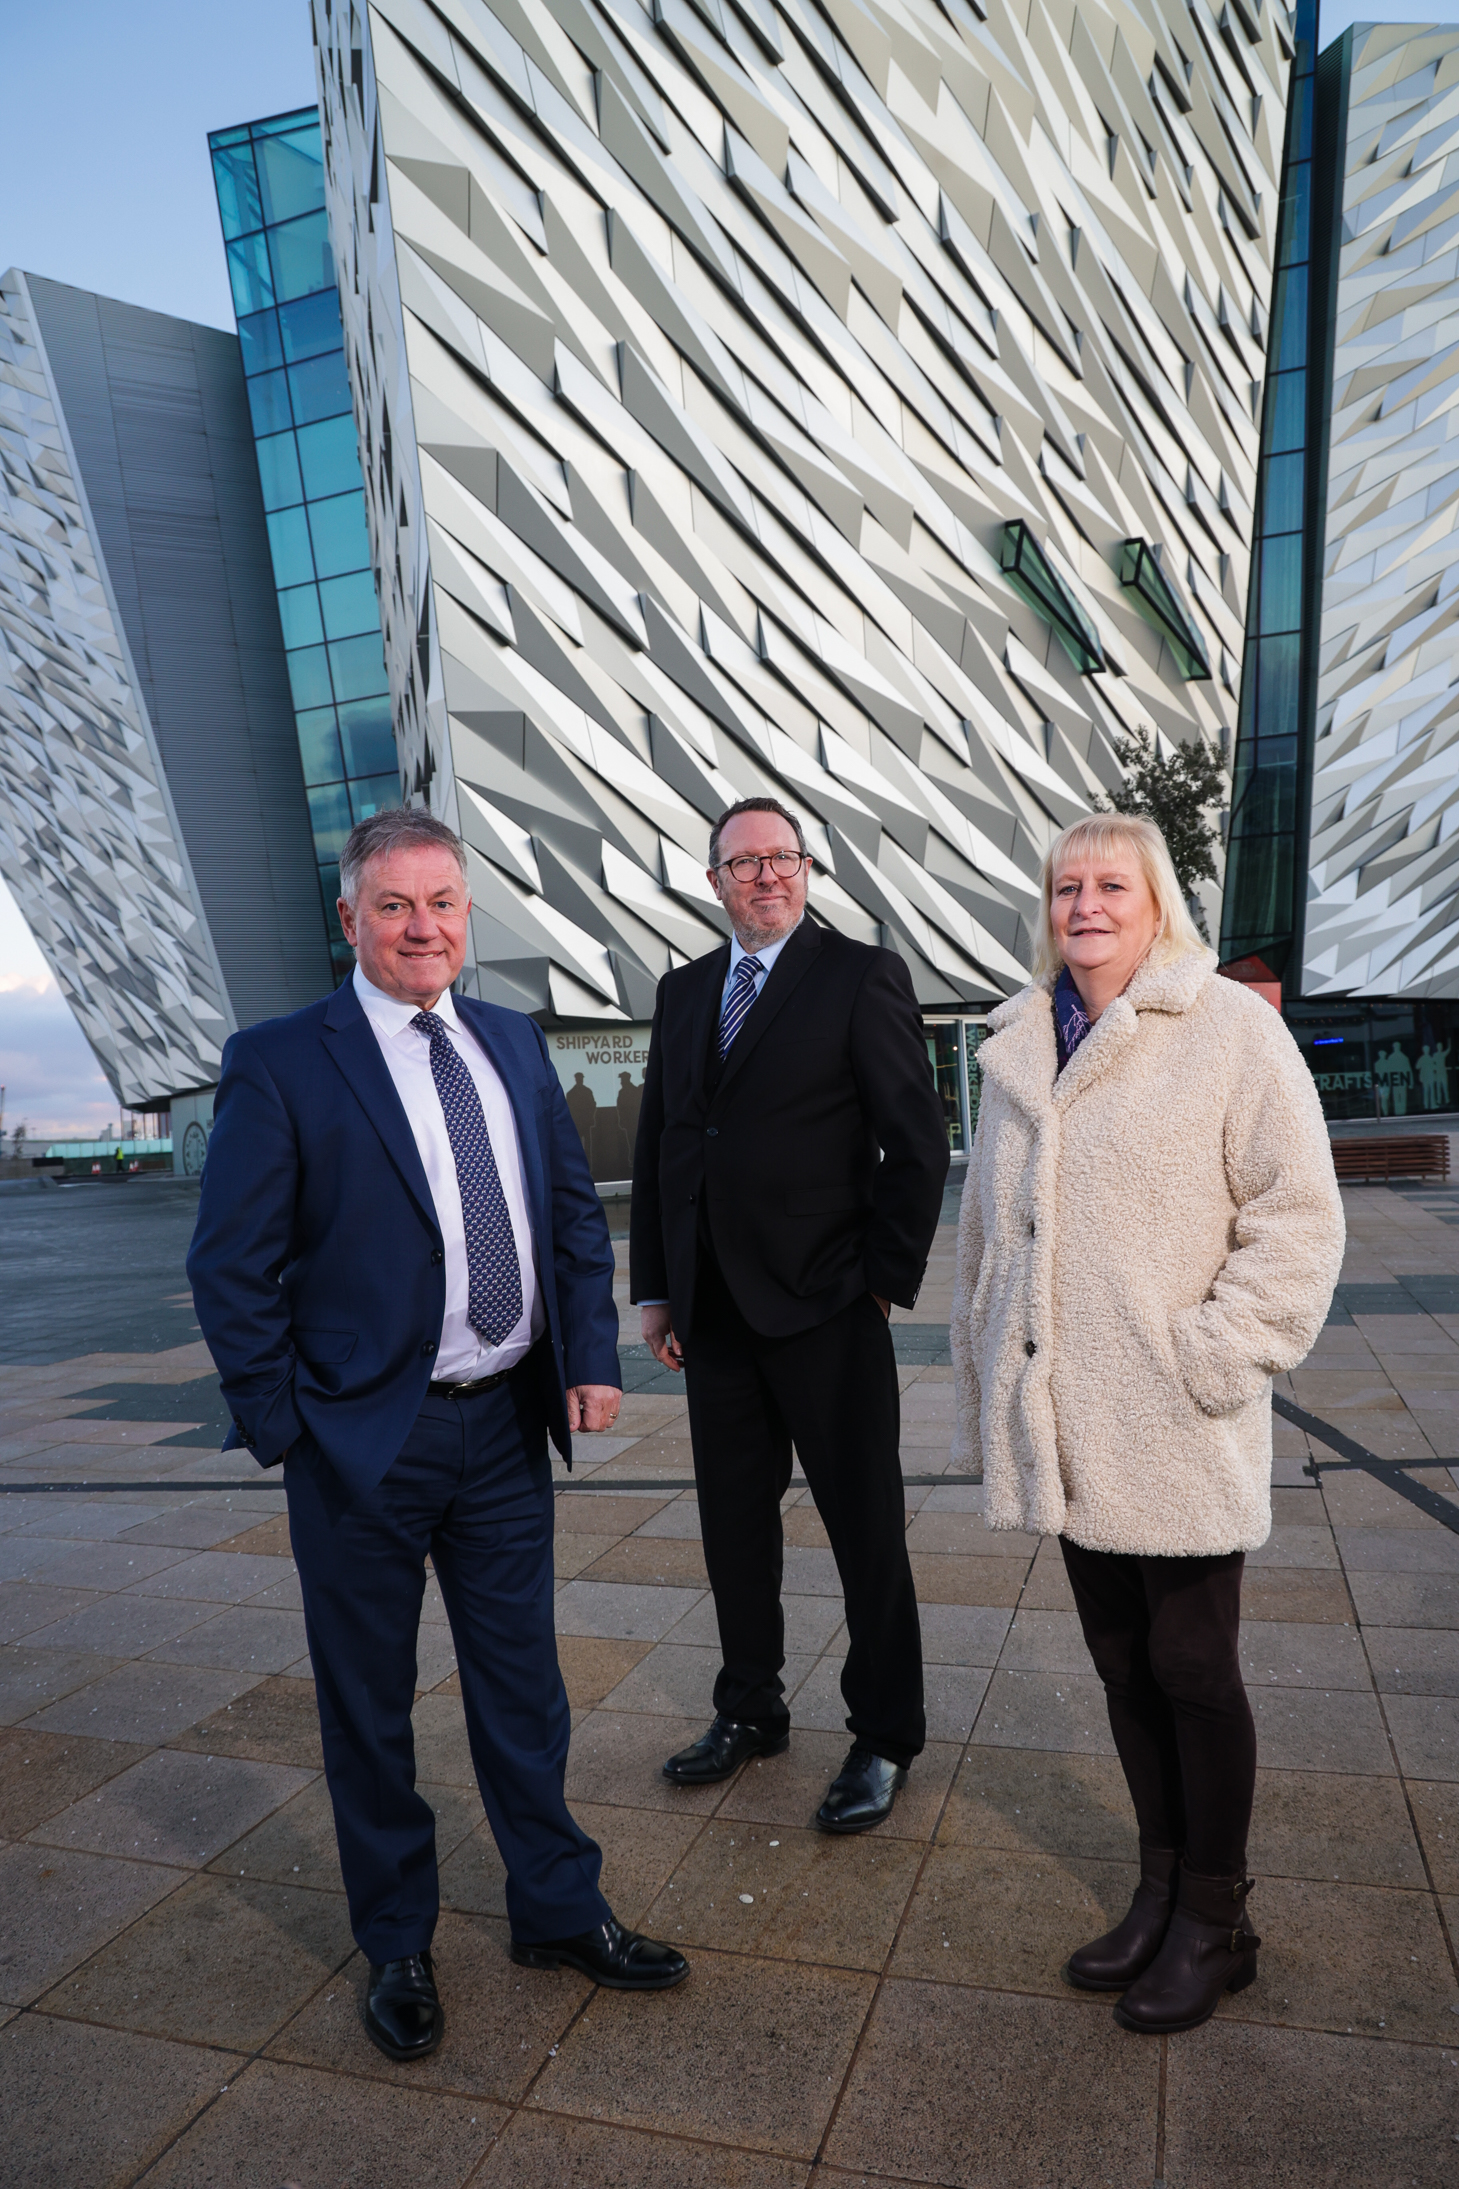 Photo of LRA Chair, Gordon Milligan, LRA Director Mark McAllister and Alison Millar at Titanic where the conference will be held on 23 February 2023